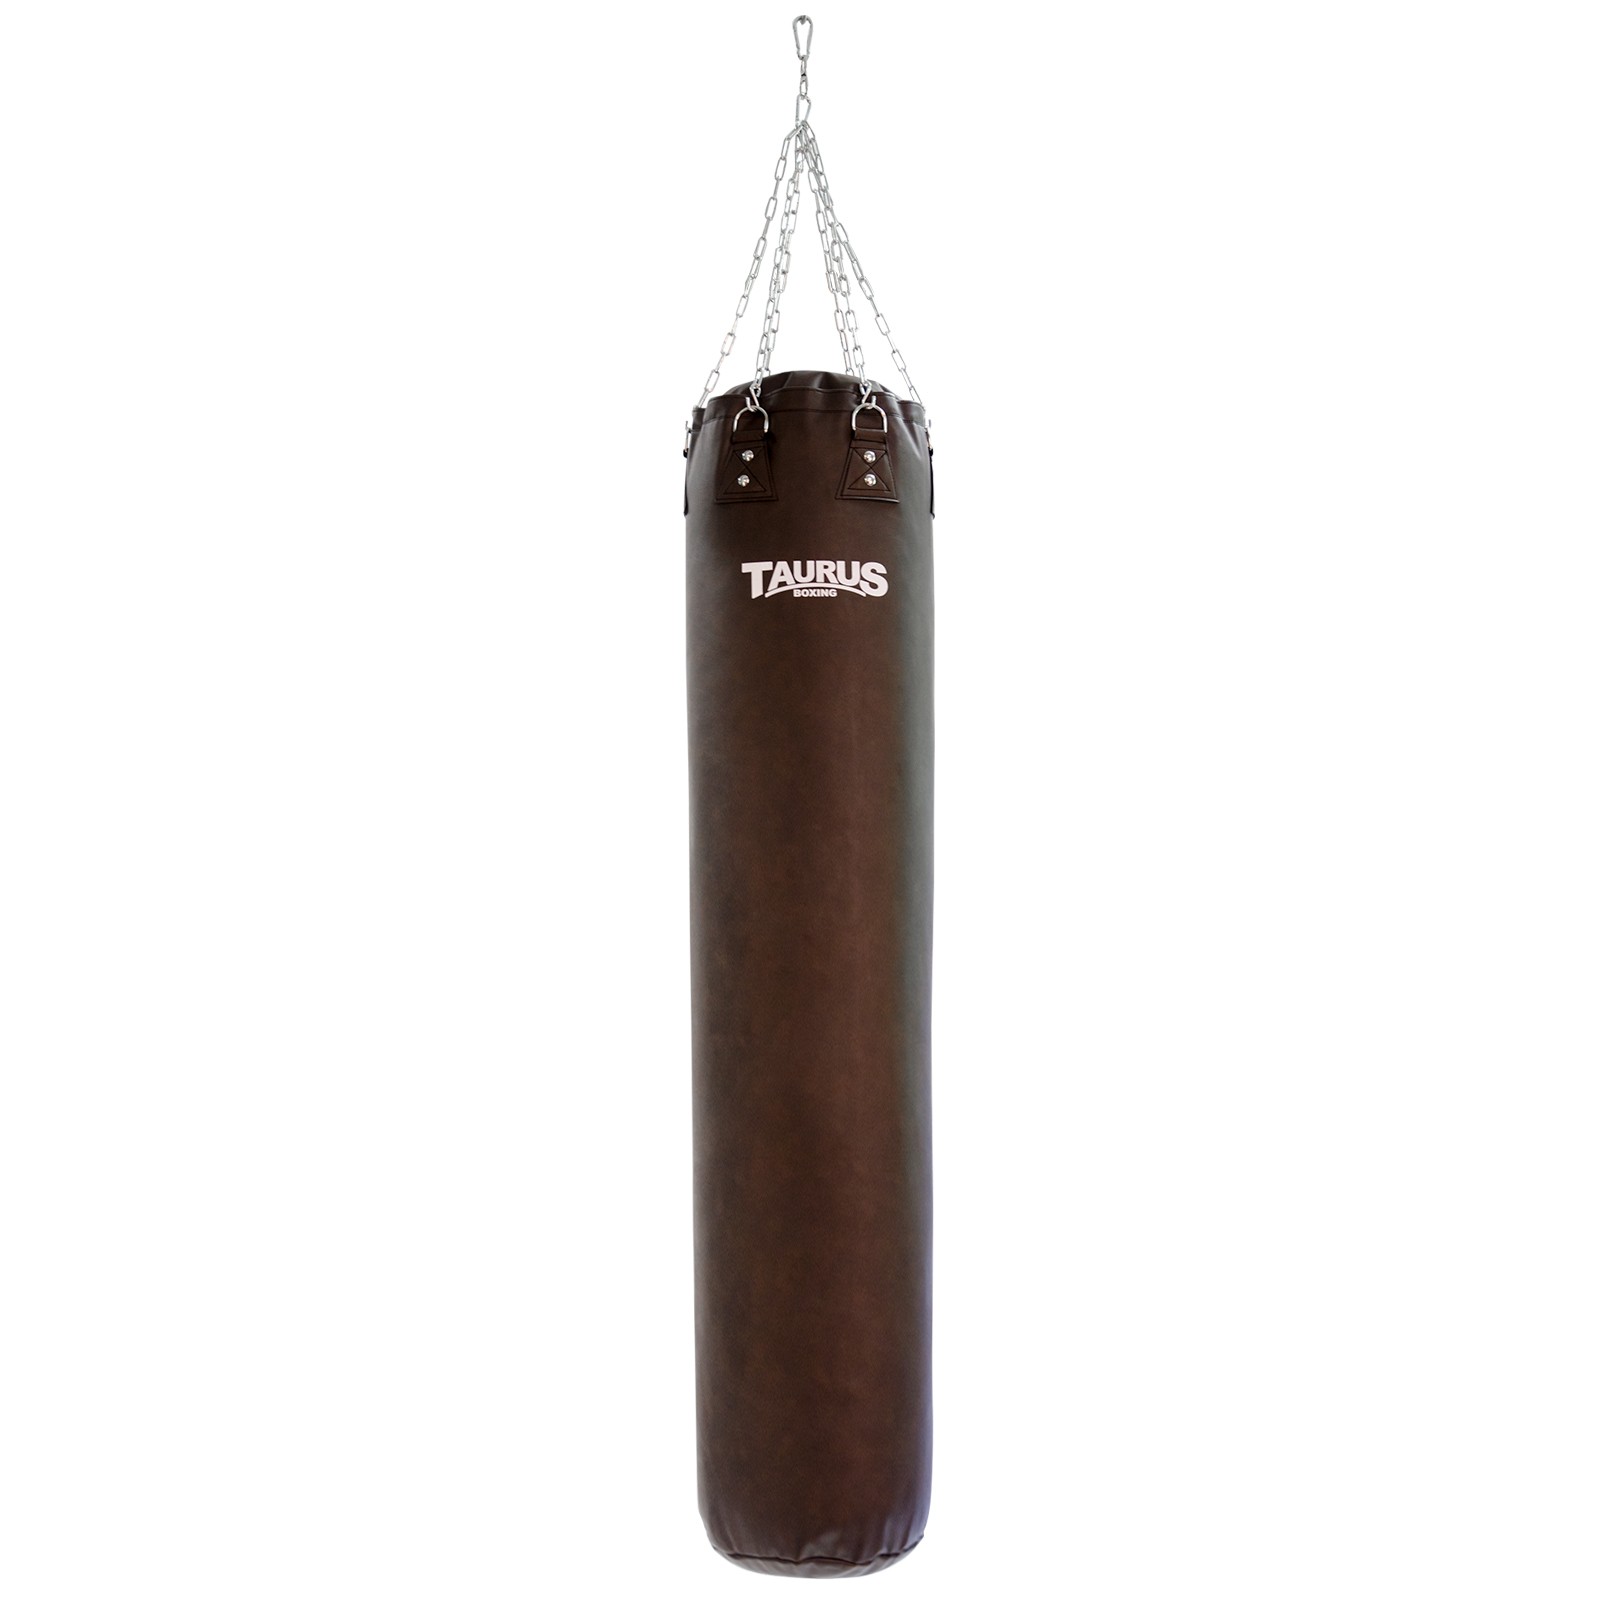 Does punching and kicking a punching bag build muscle in the arms, chest,  and legs? - Quora